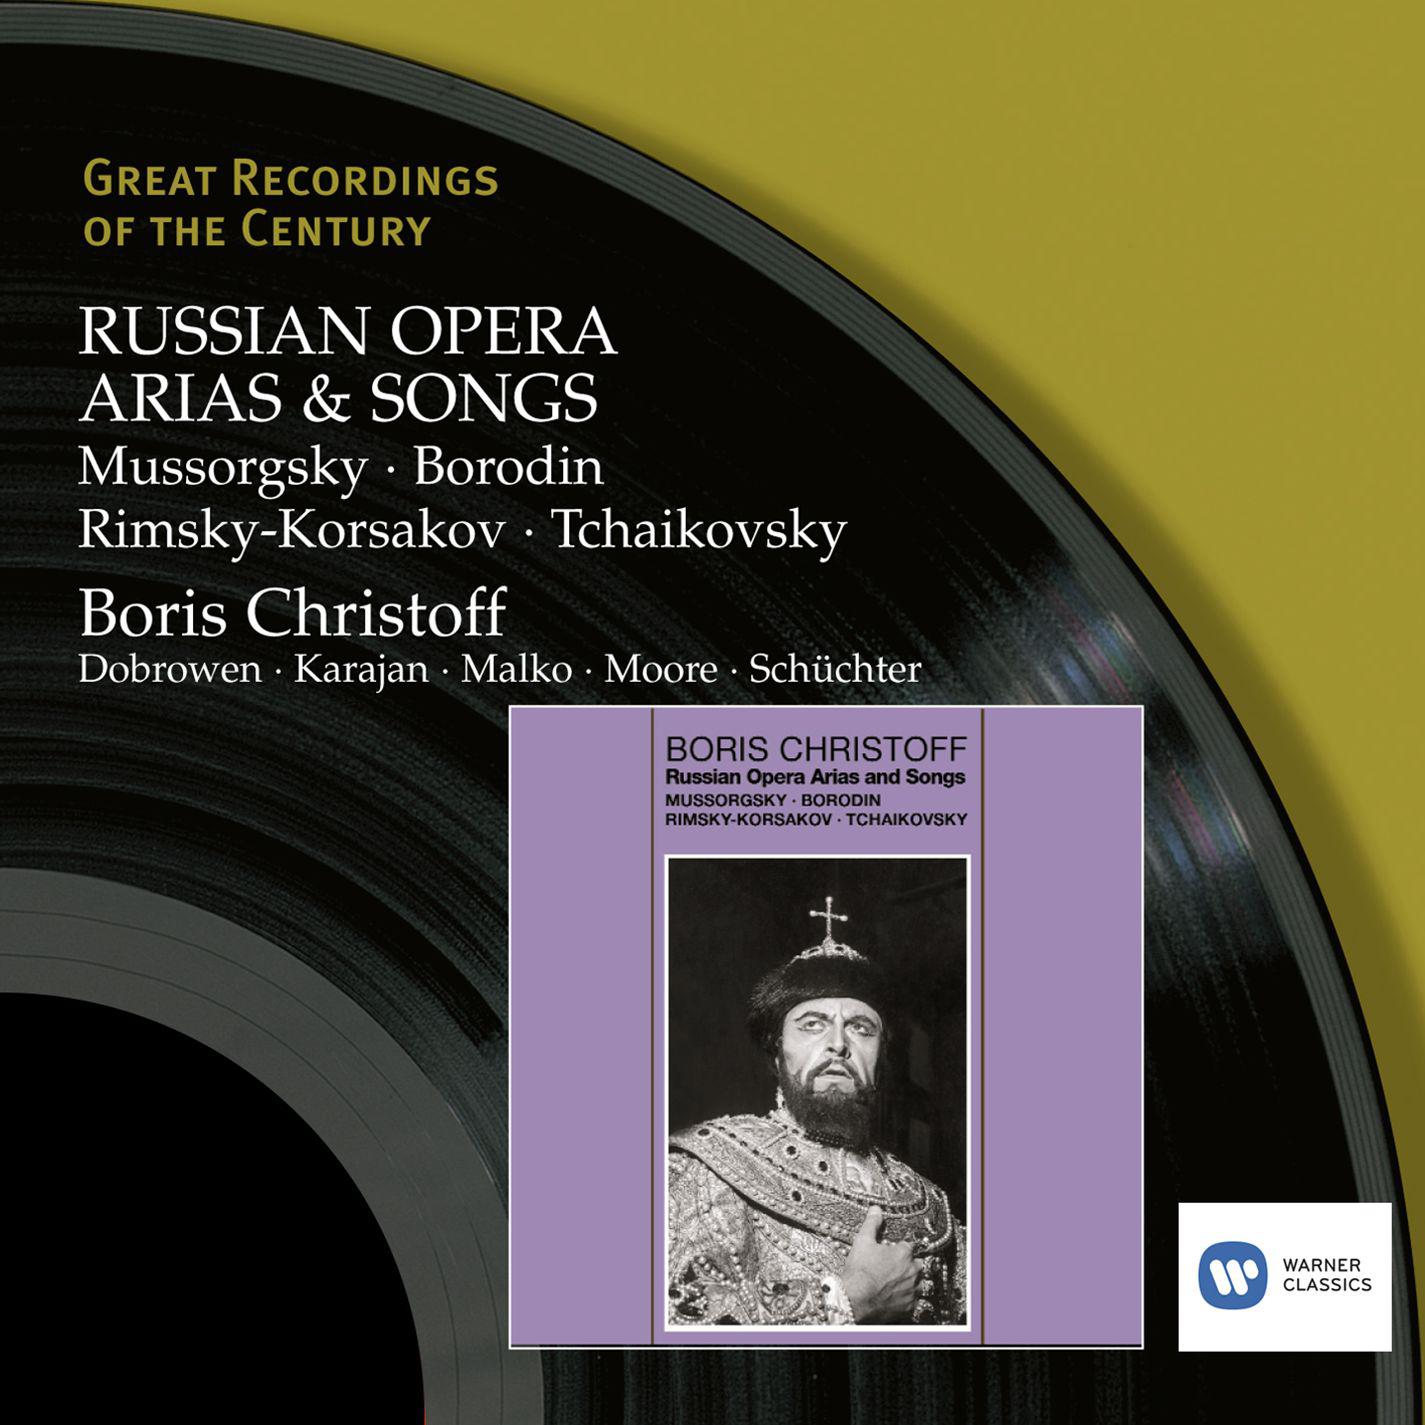 Eugene Onegin, Op. 24, Act 3:Prince Gremin's Aria